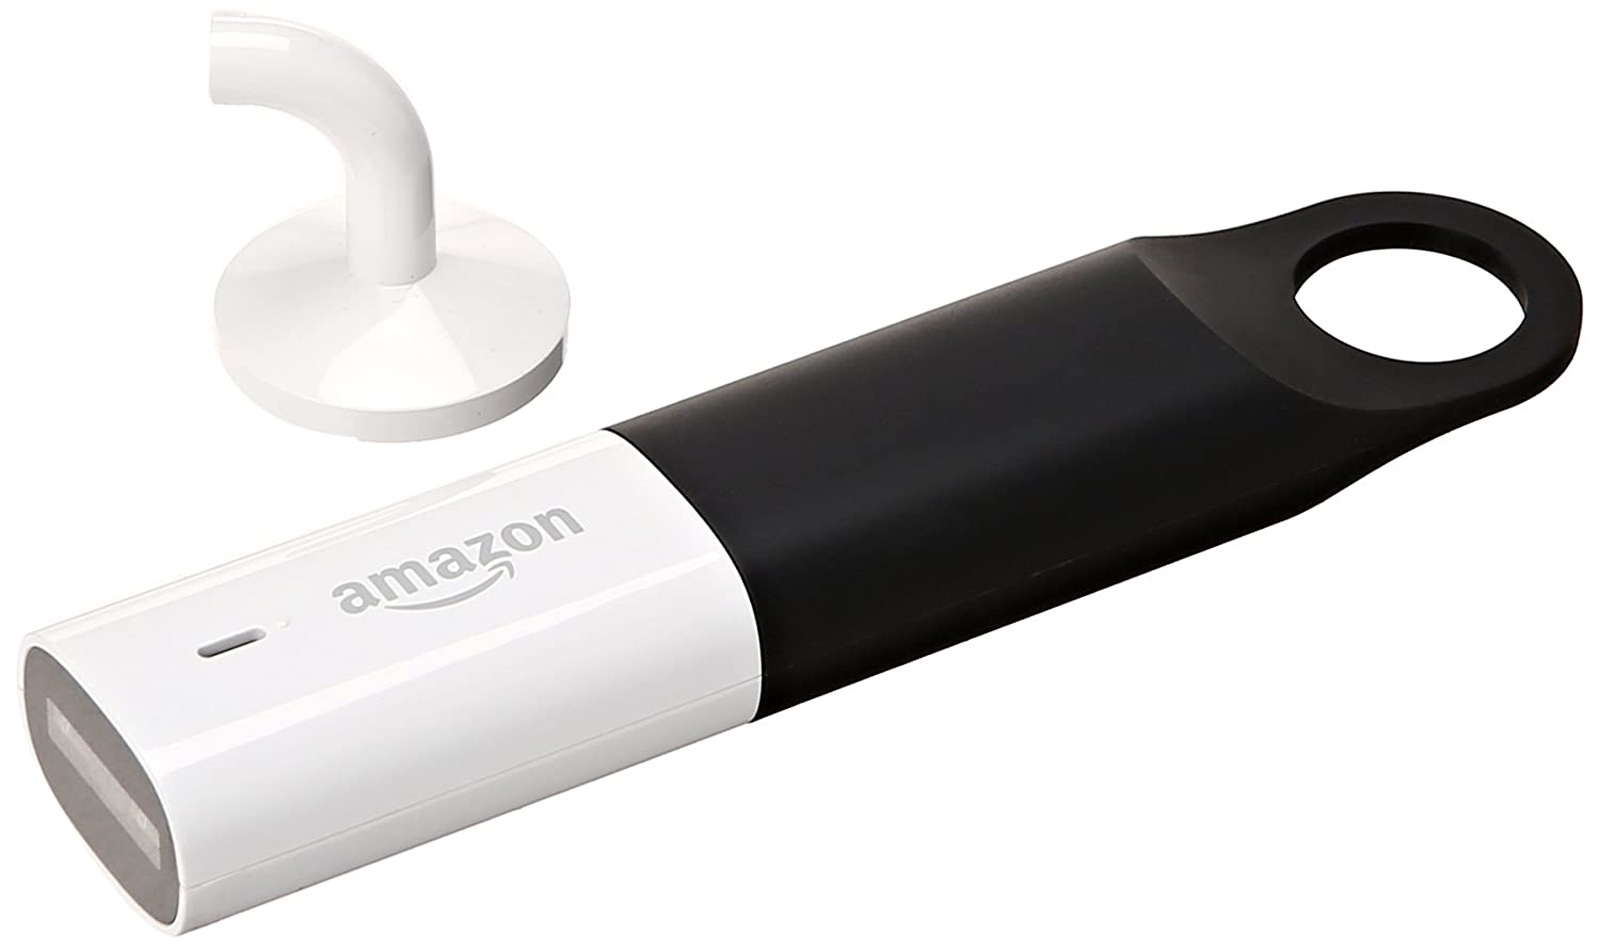 Amazon will stop supporting its Dash Wand shopping device on July 21st | DeviceDaily.com